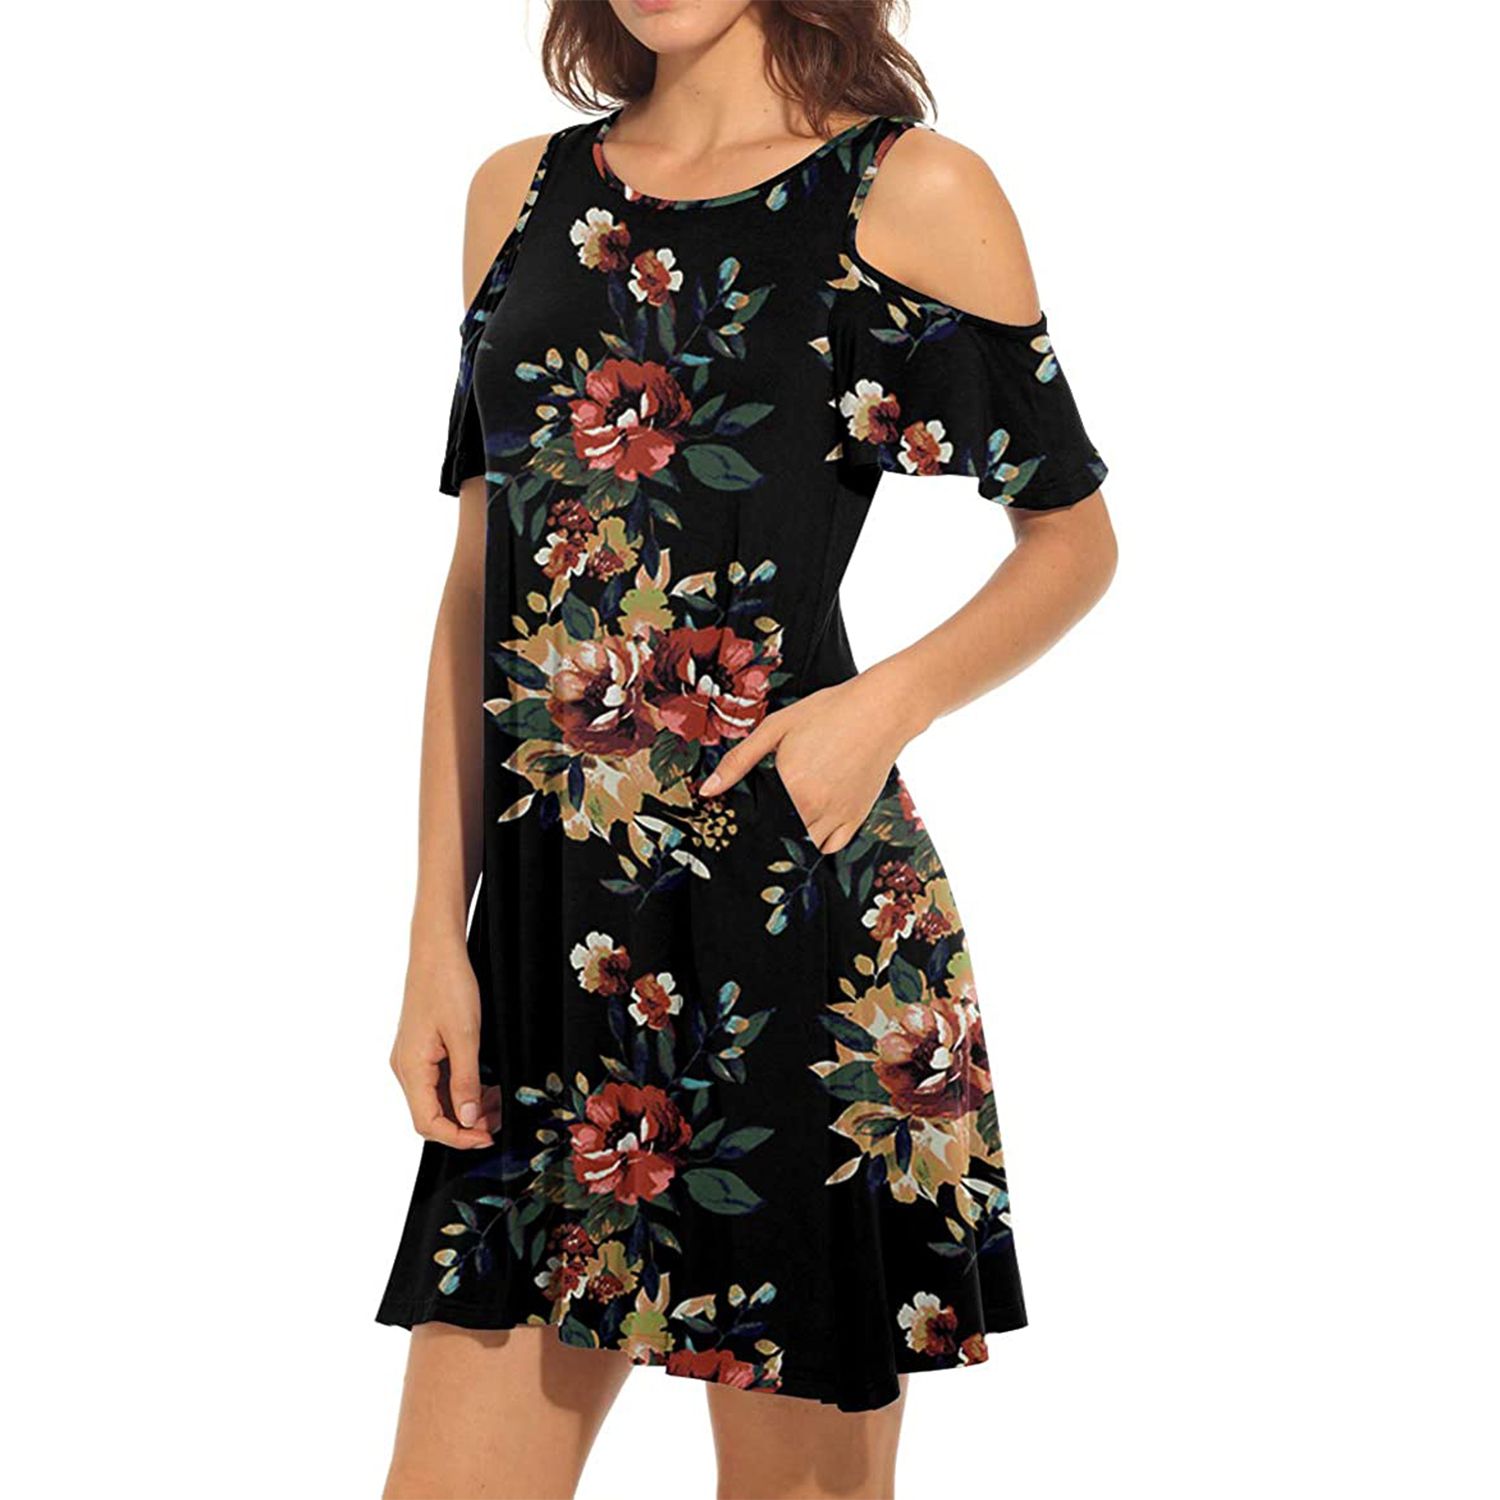 The Qixing Cold-Shoulder Swing T-Shirt Dress Is Popular on Amazon ...